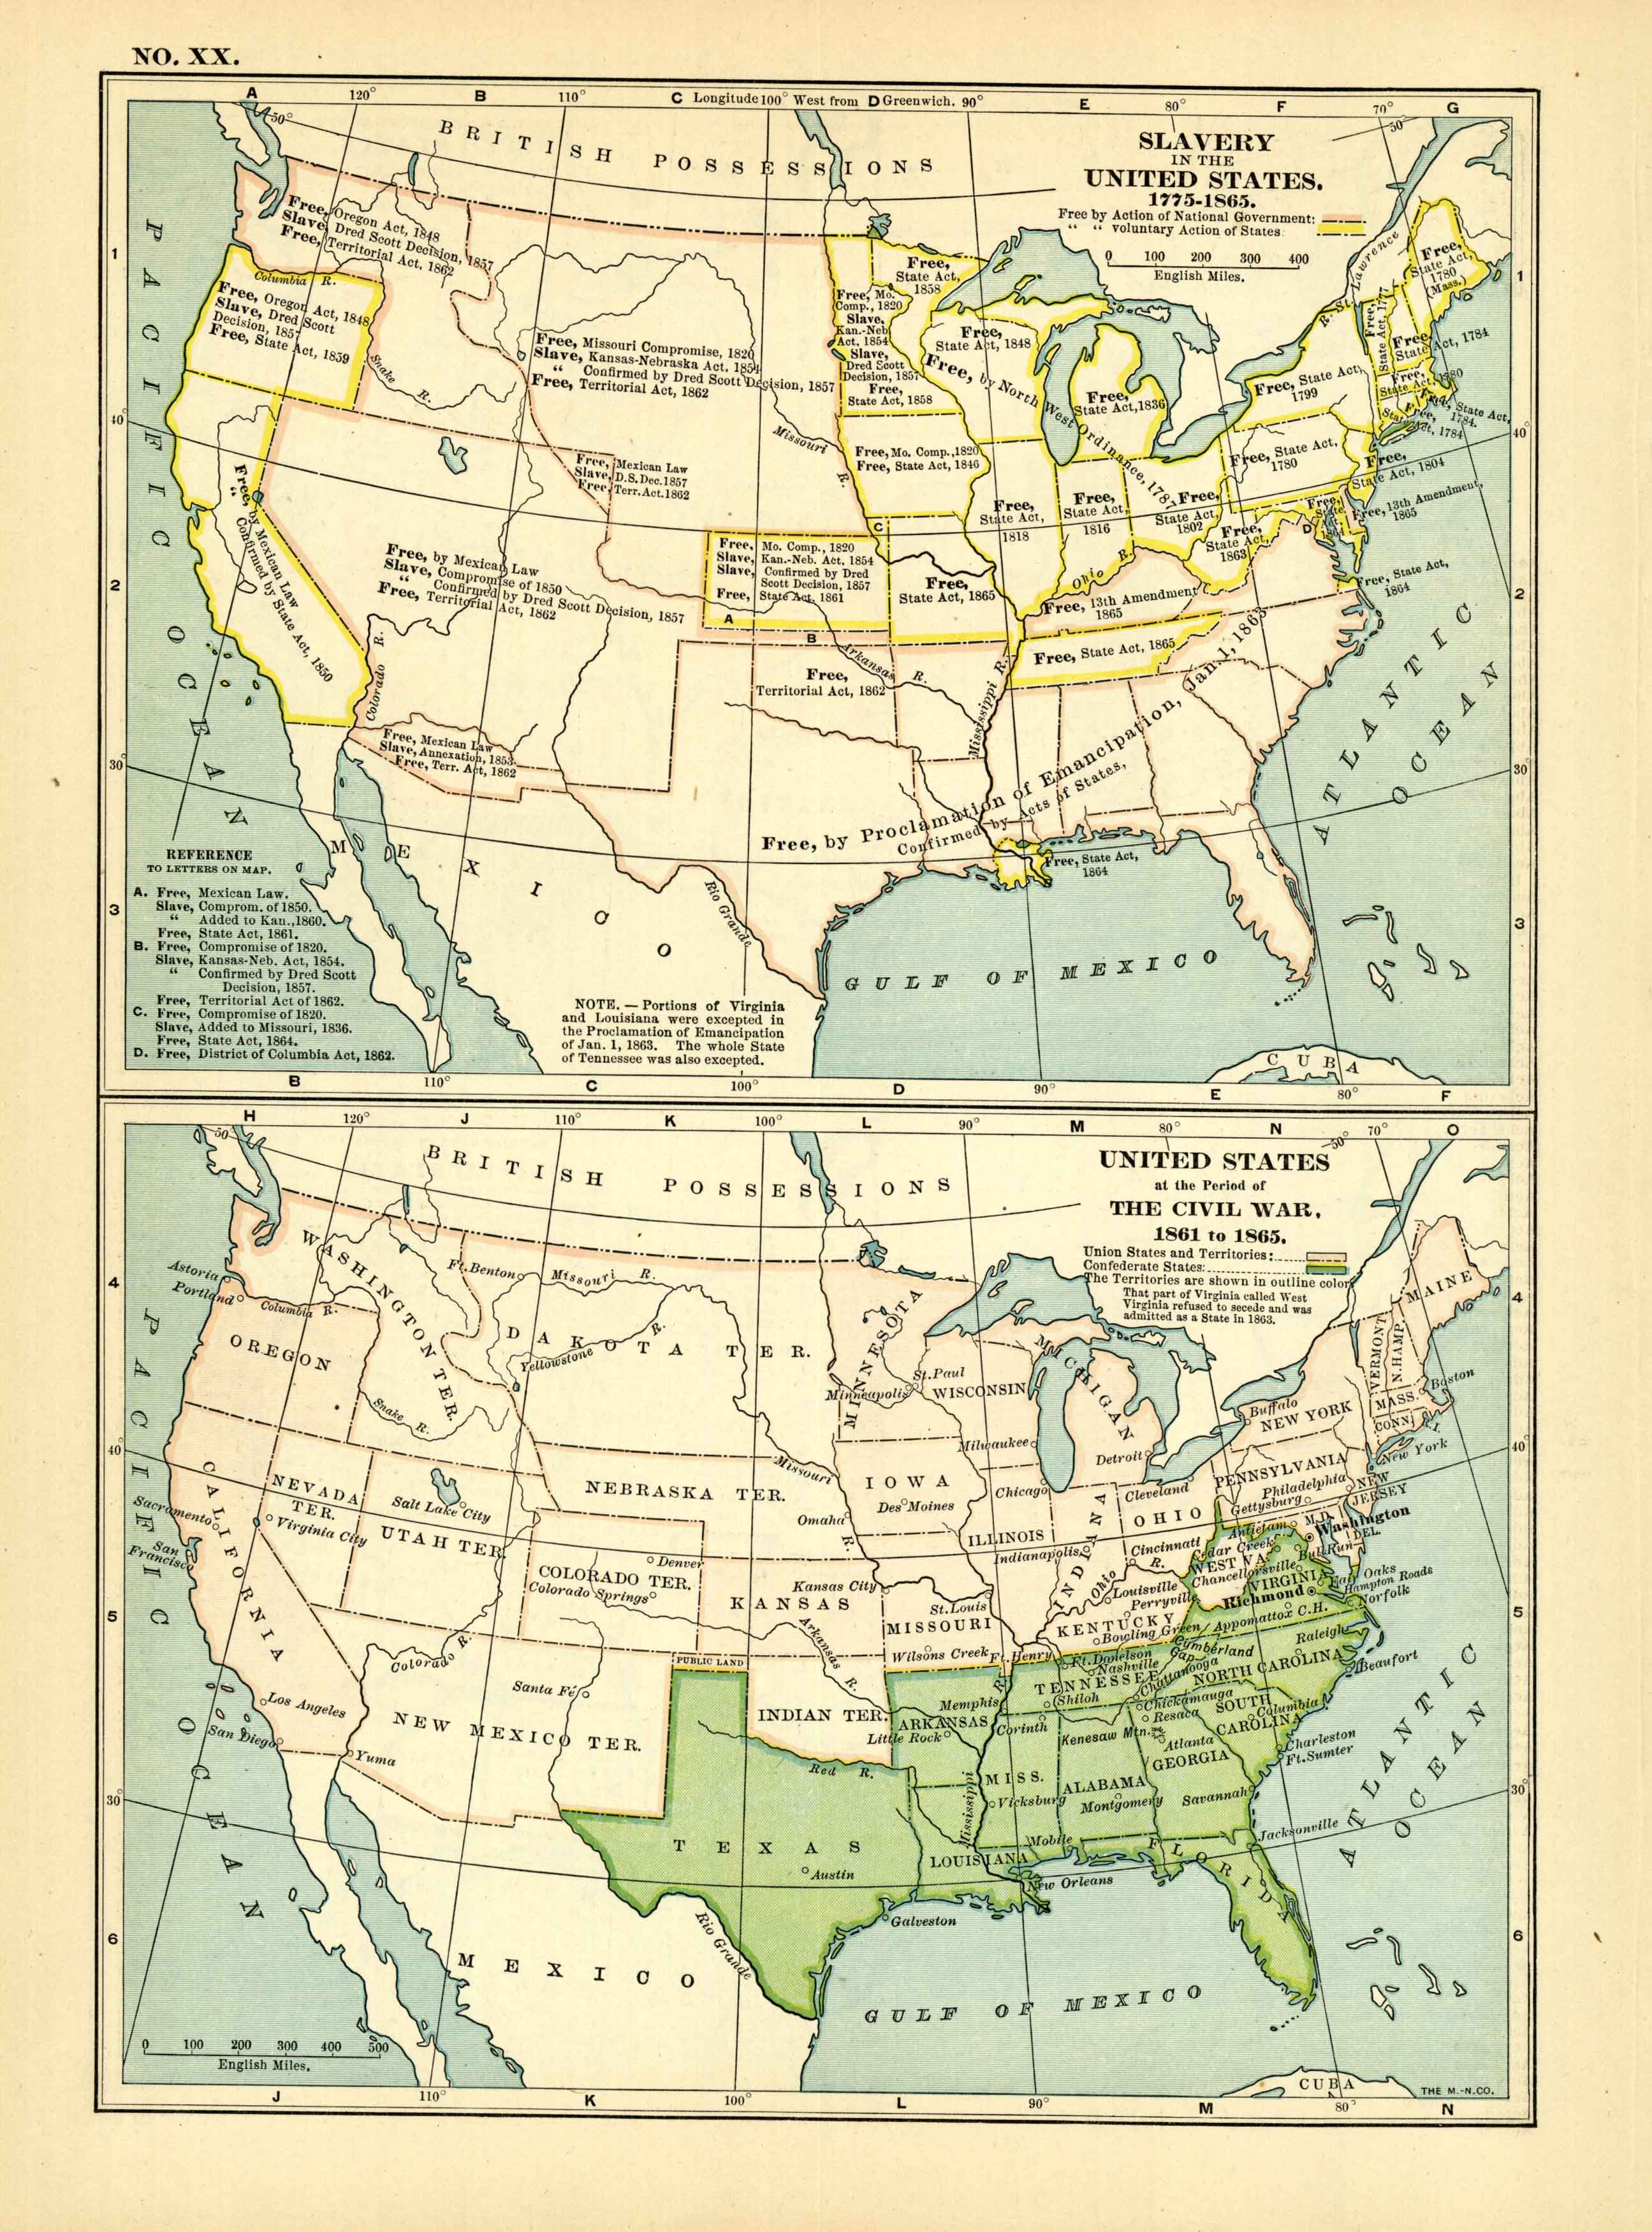 Slavery in the United States 1775-1865 / United States at the Period of ...